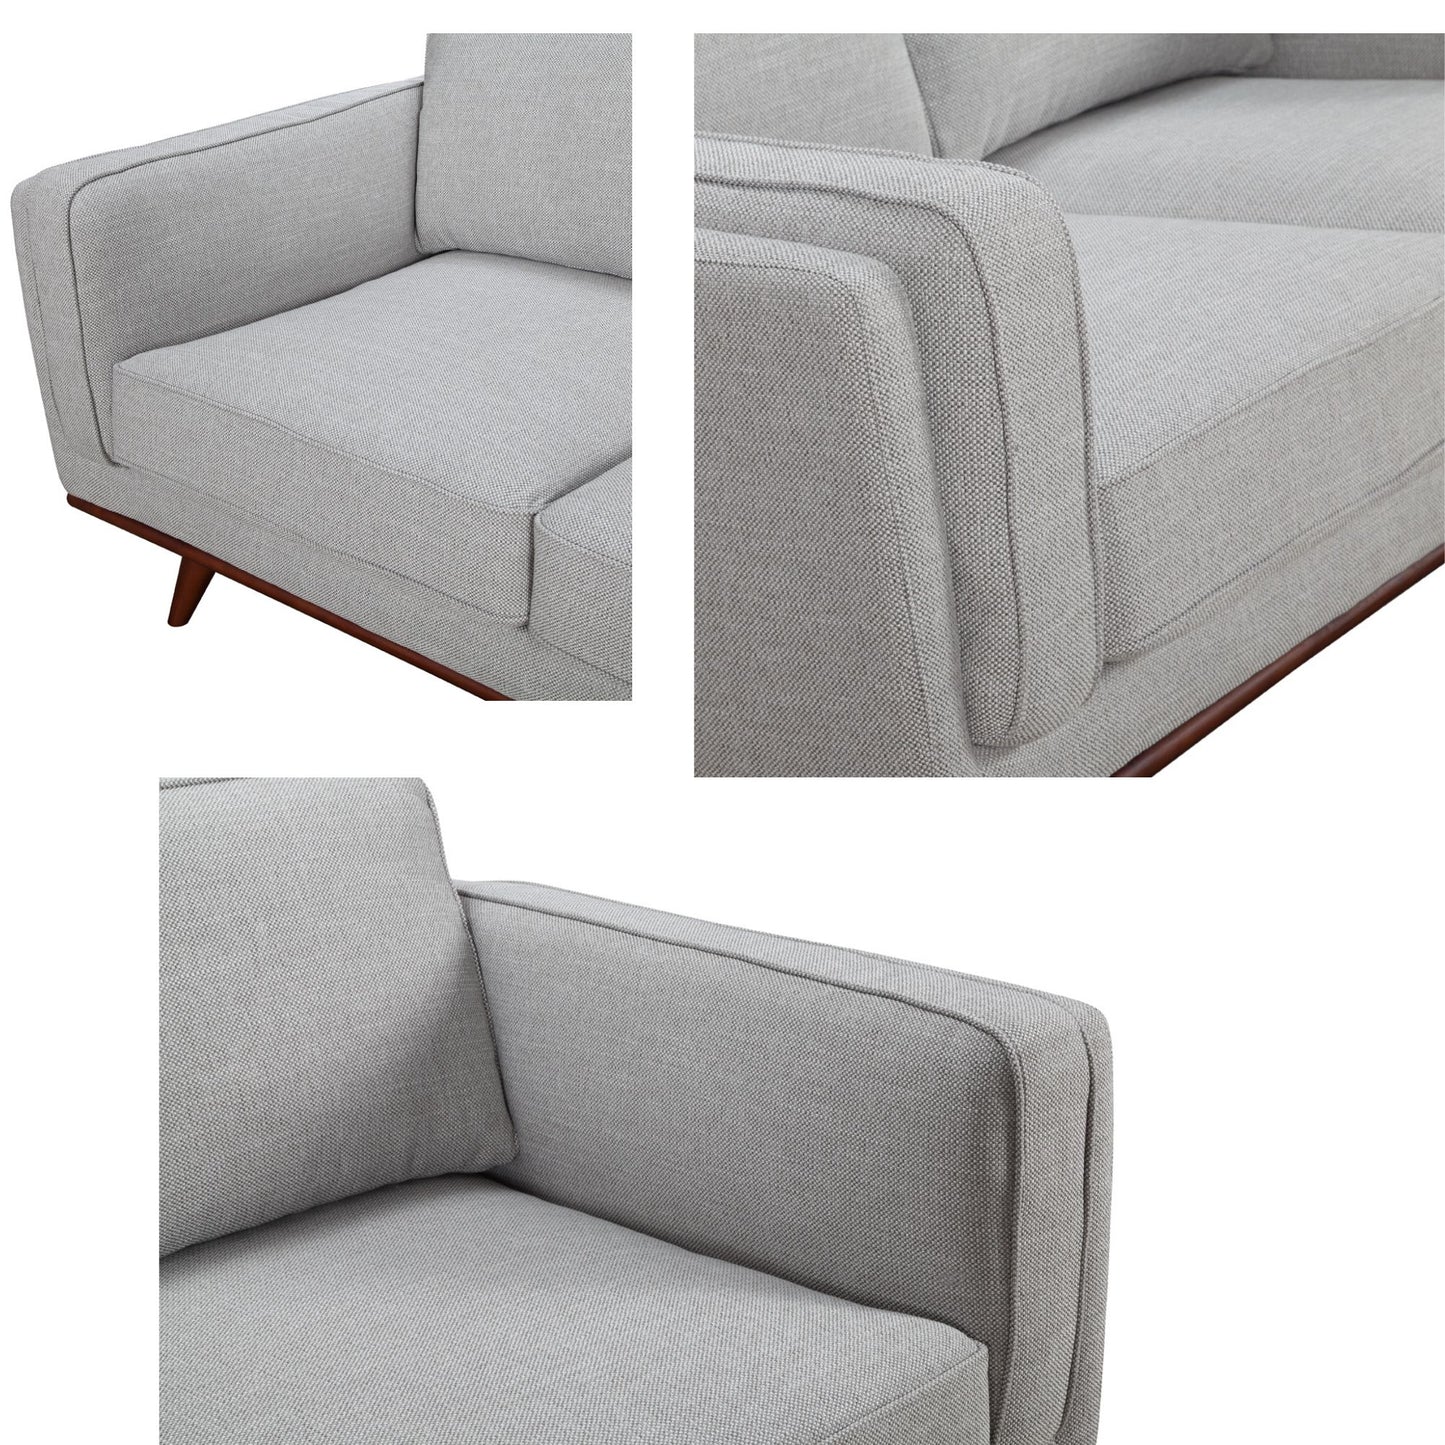 Petalsoft 2 Seater Couch - Grey